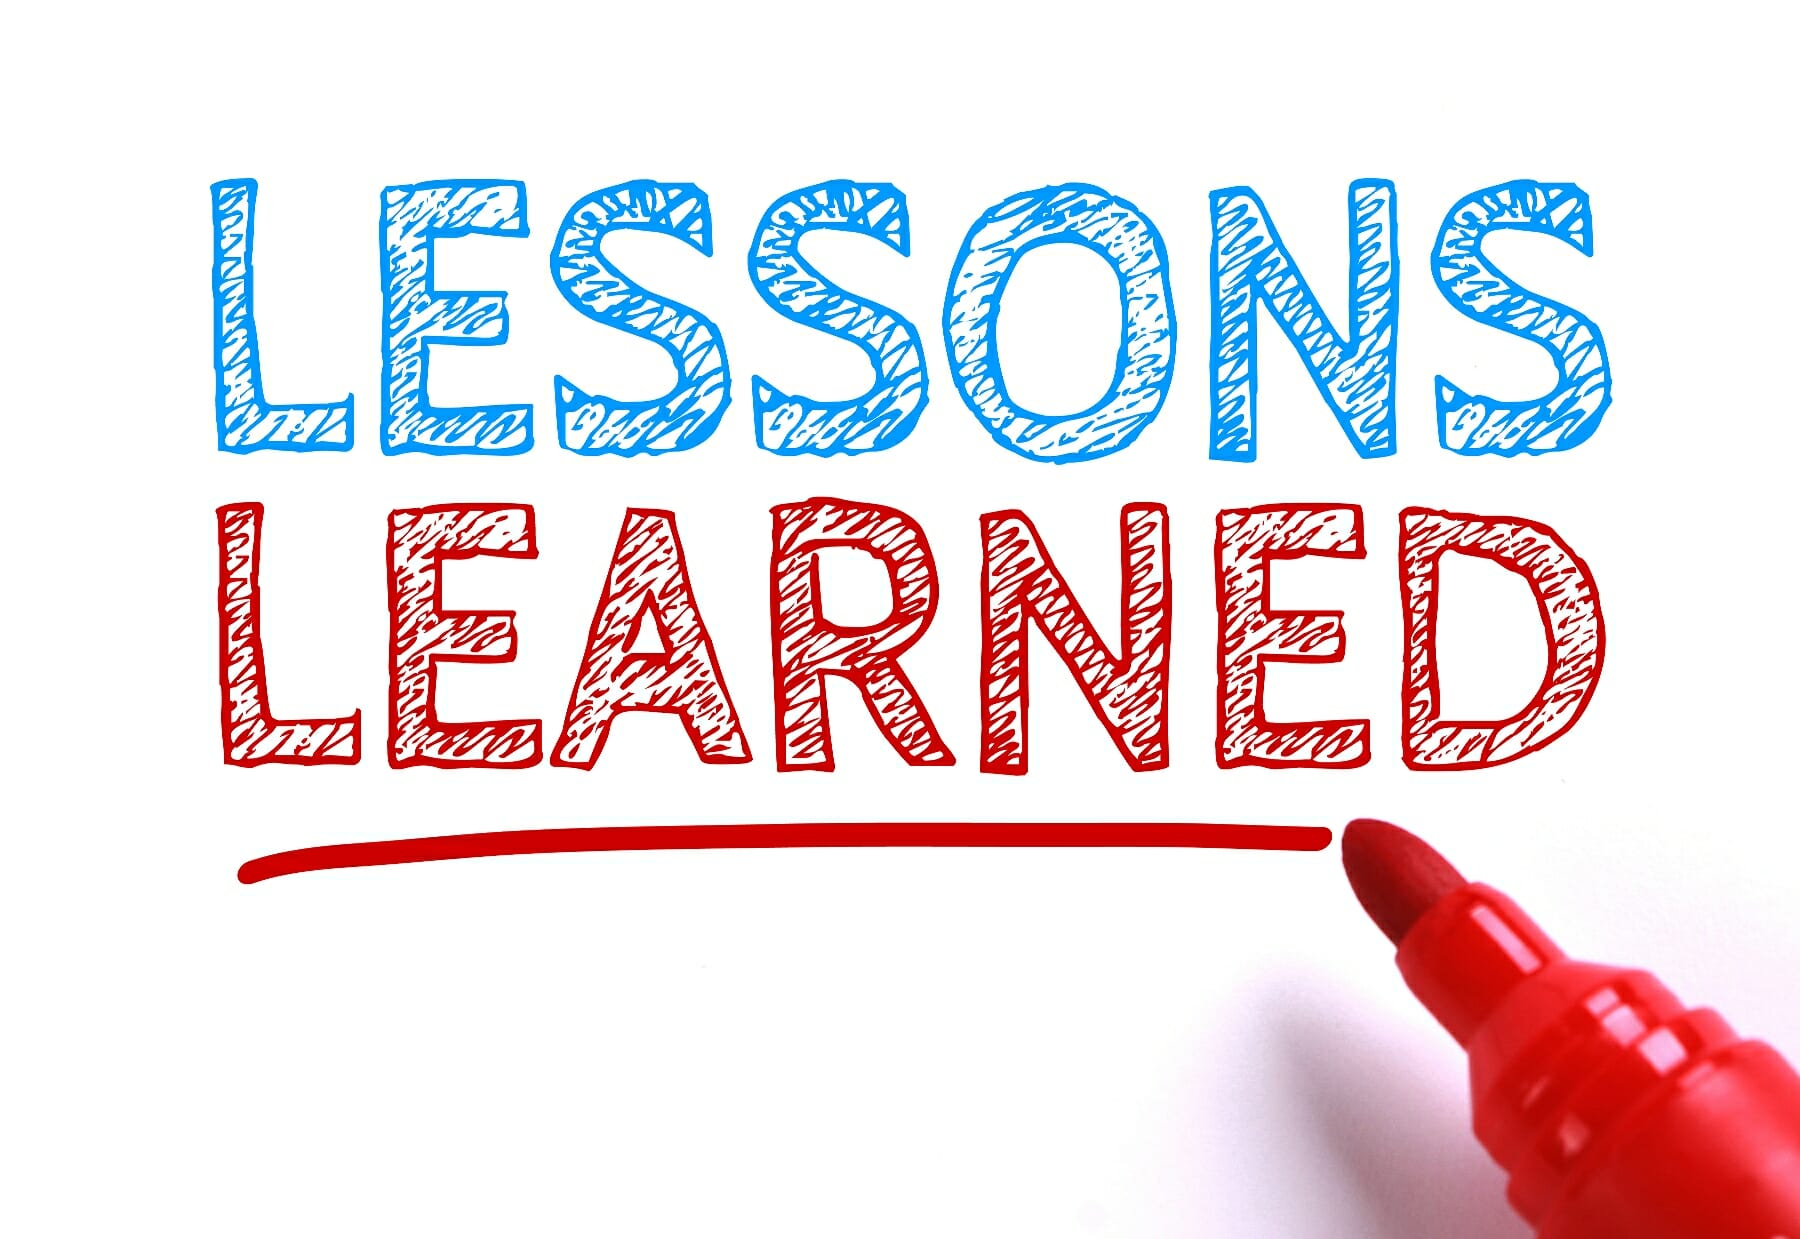 PMBOK finally expands on lessons learned, but is it enough?